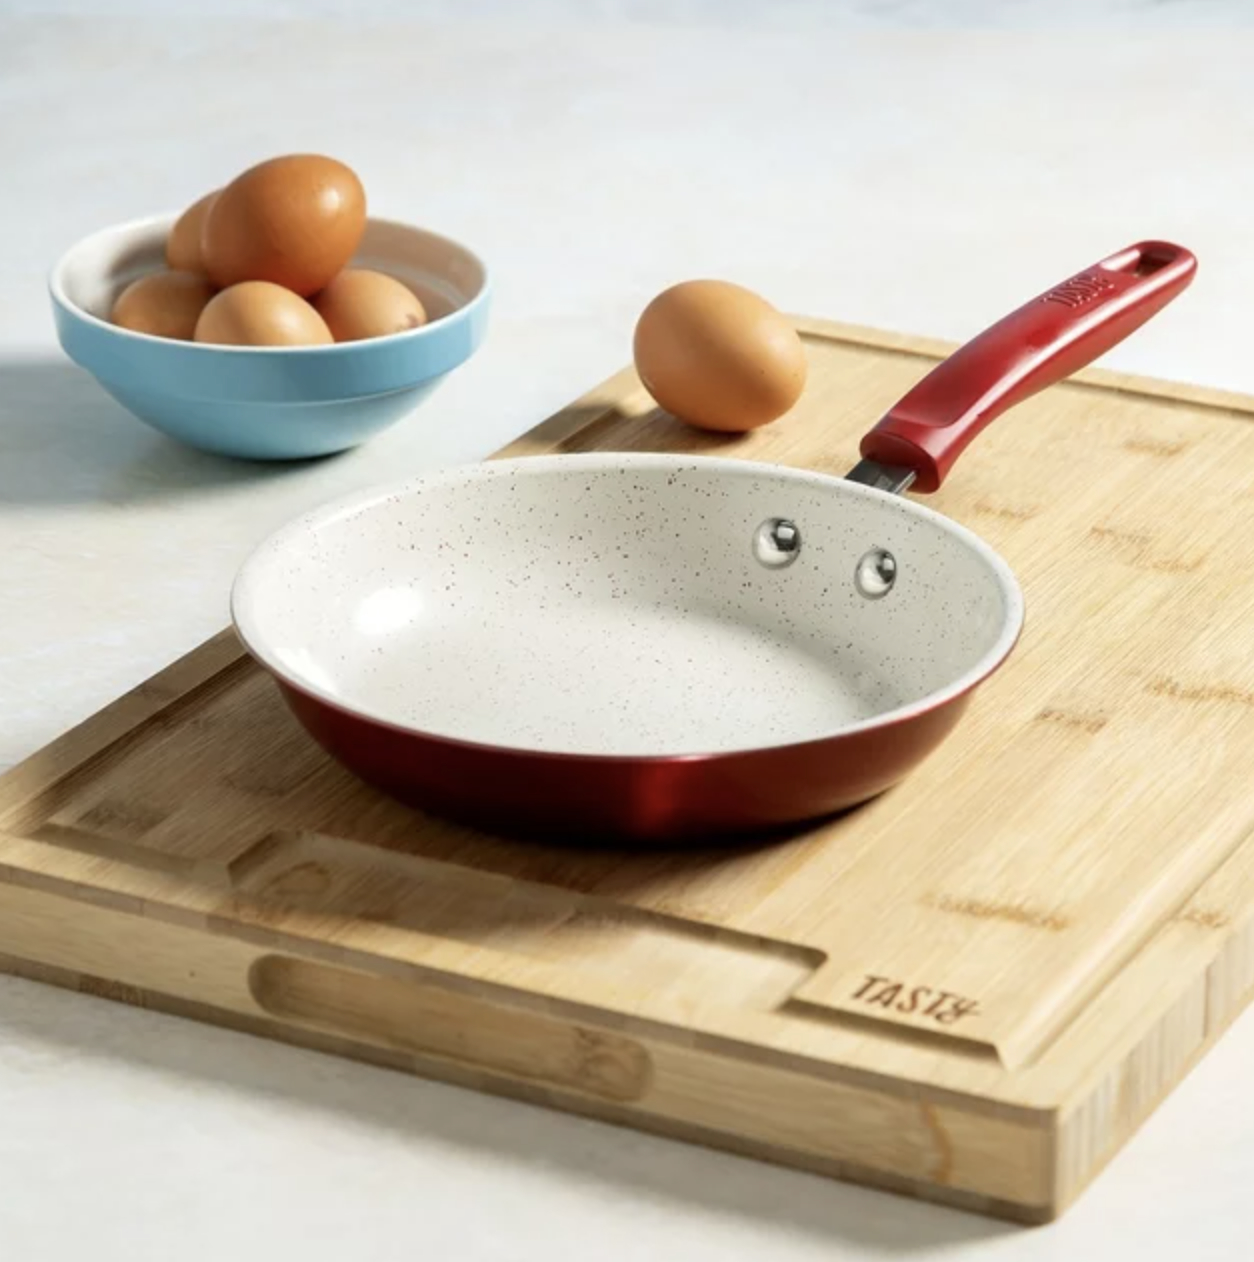 The red ceramic fry pan on cutting board